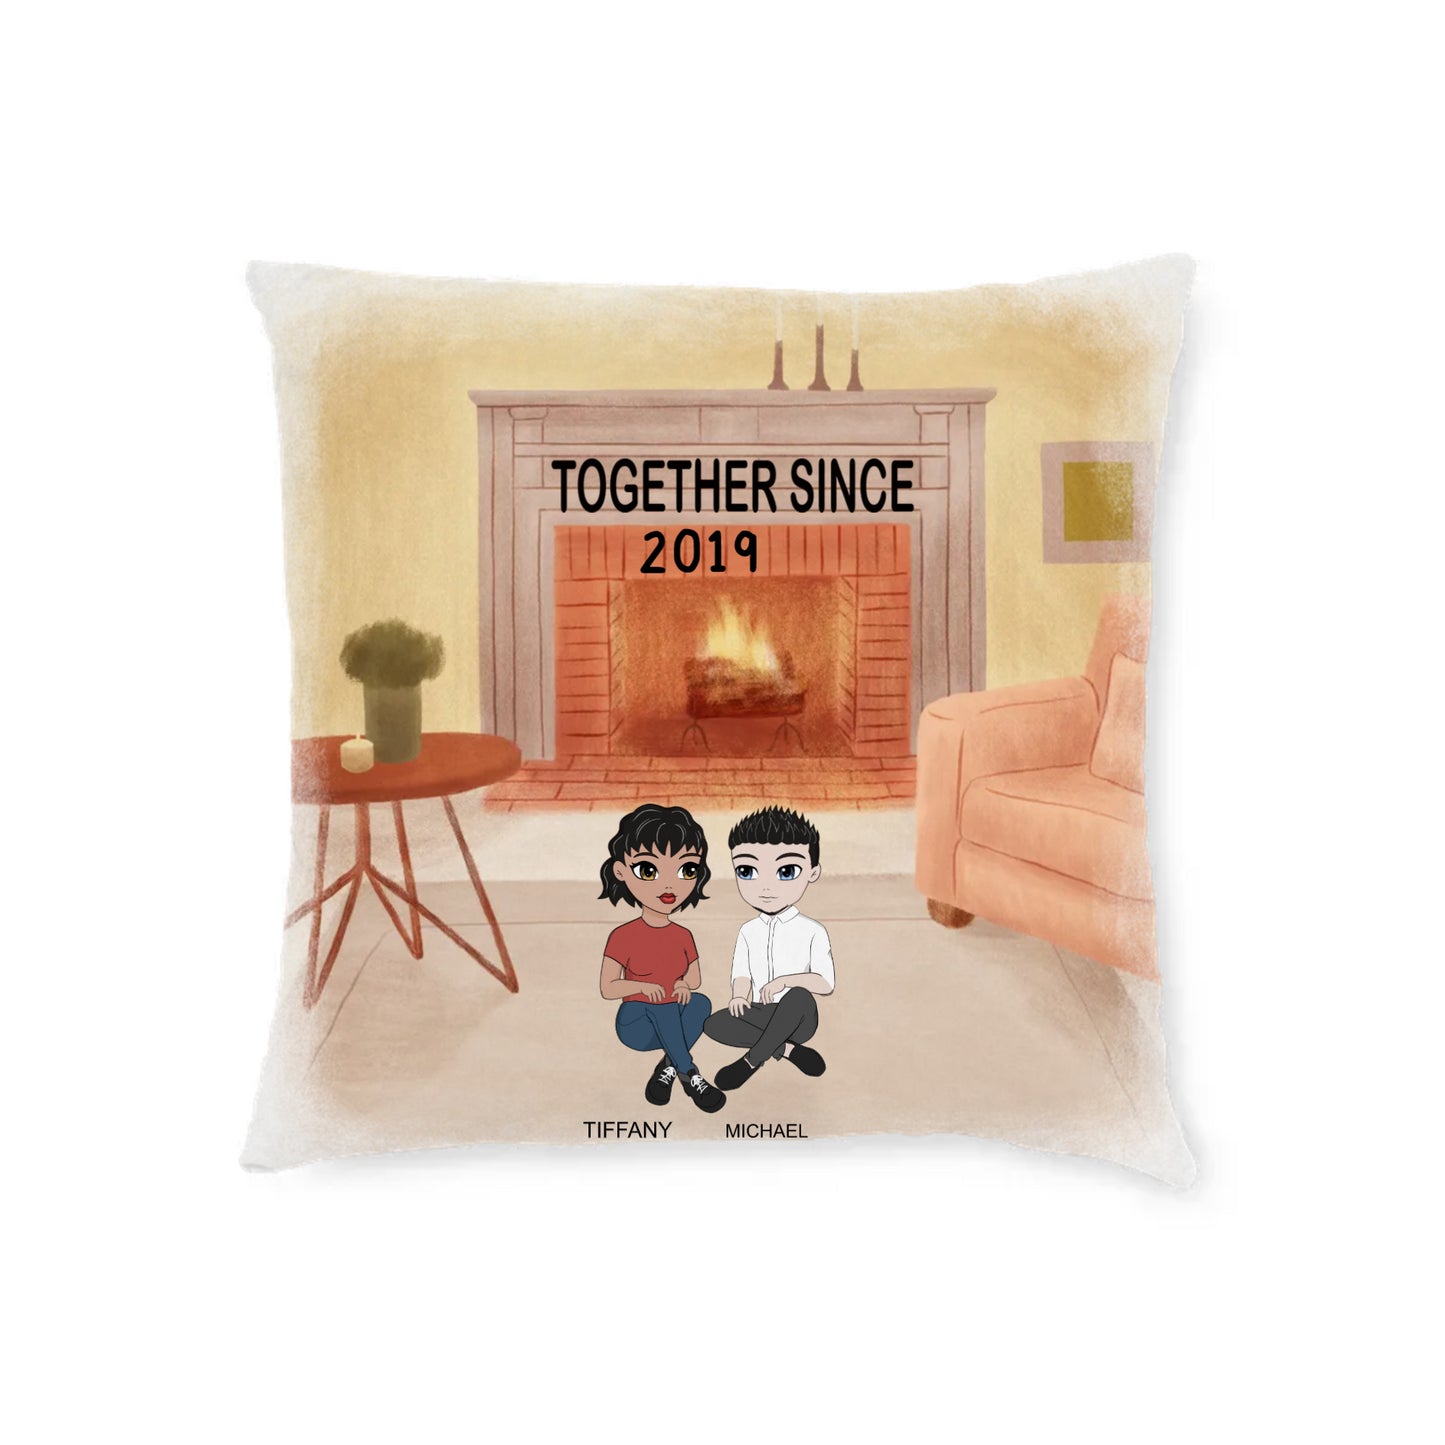 TOGETHER SINCE SQUARE PILLOW